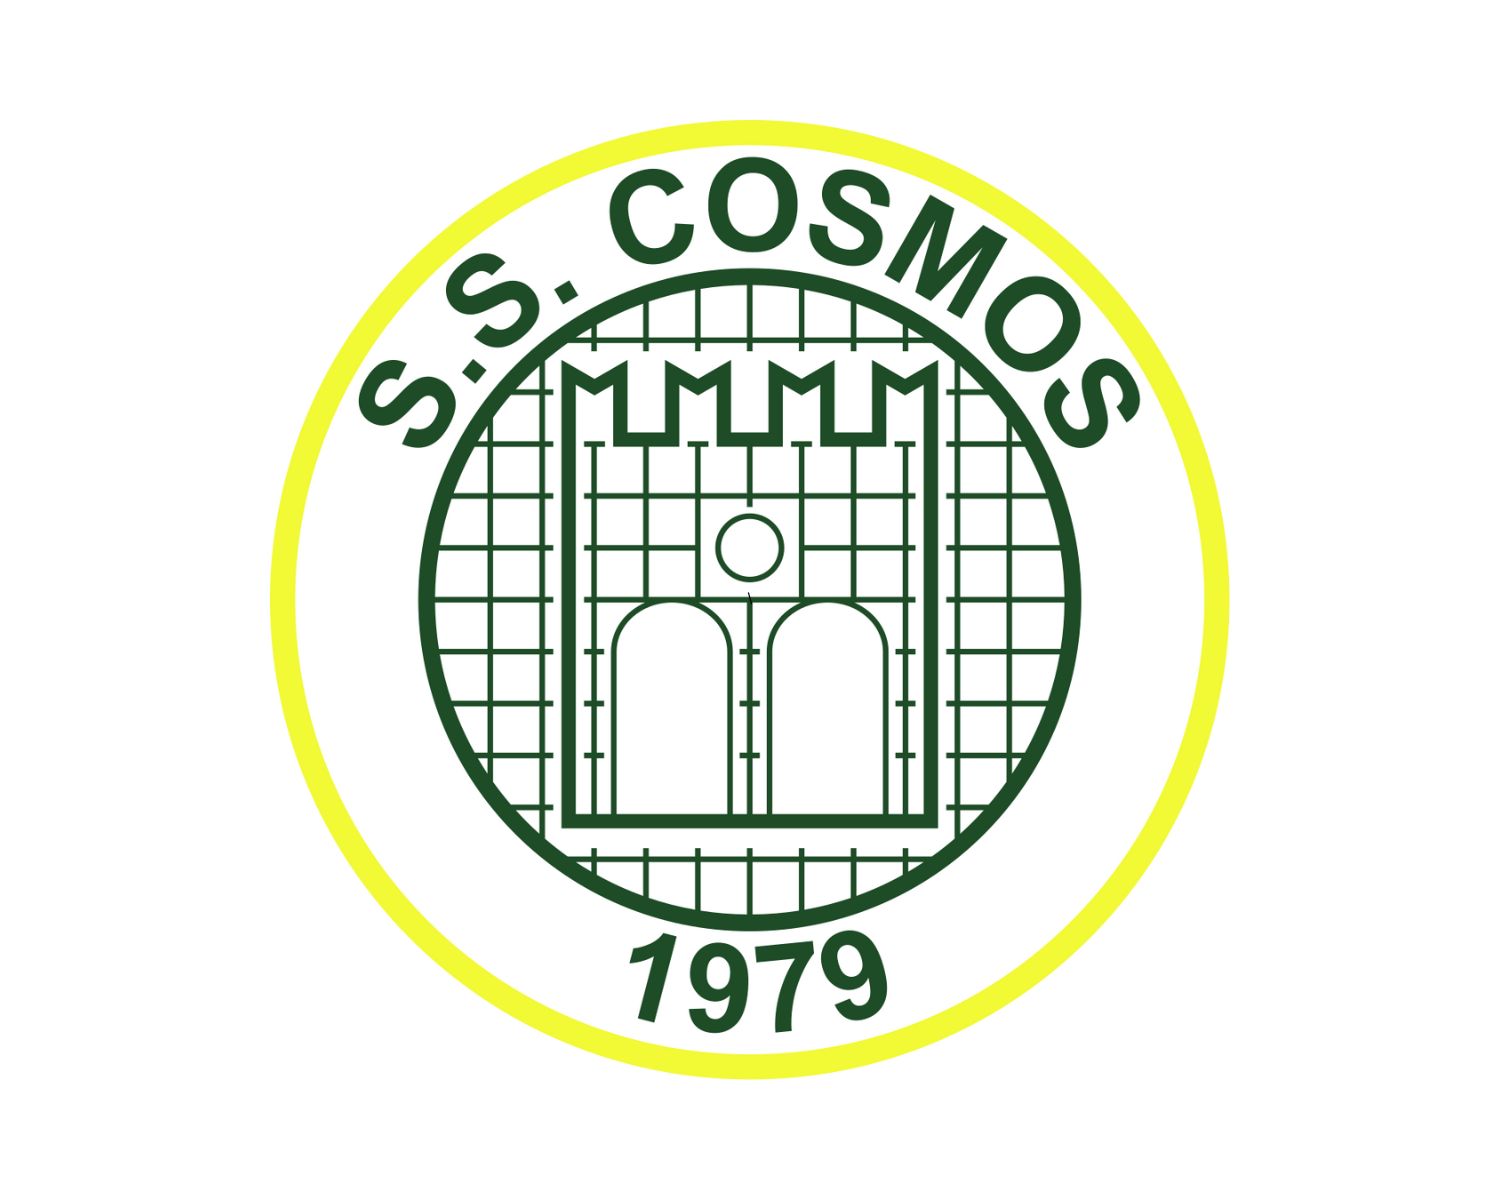 ss-cosmos-19-football-club-facts